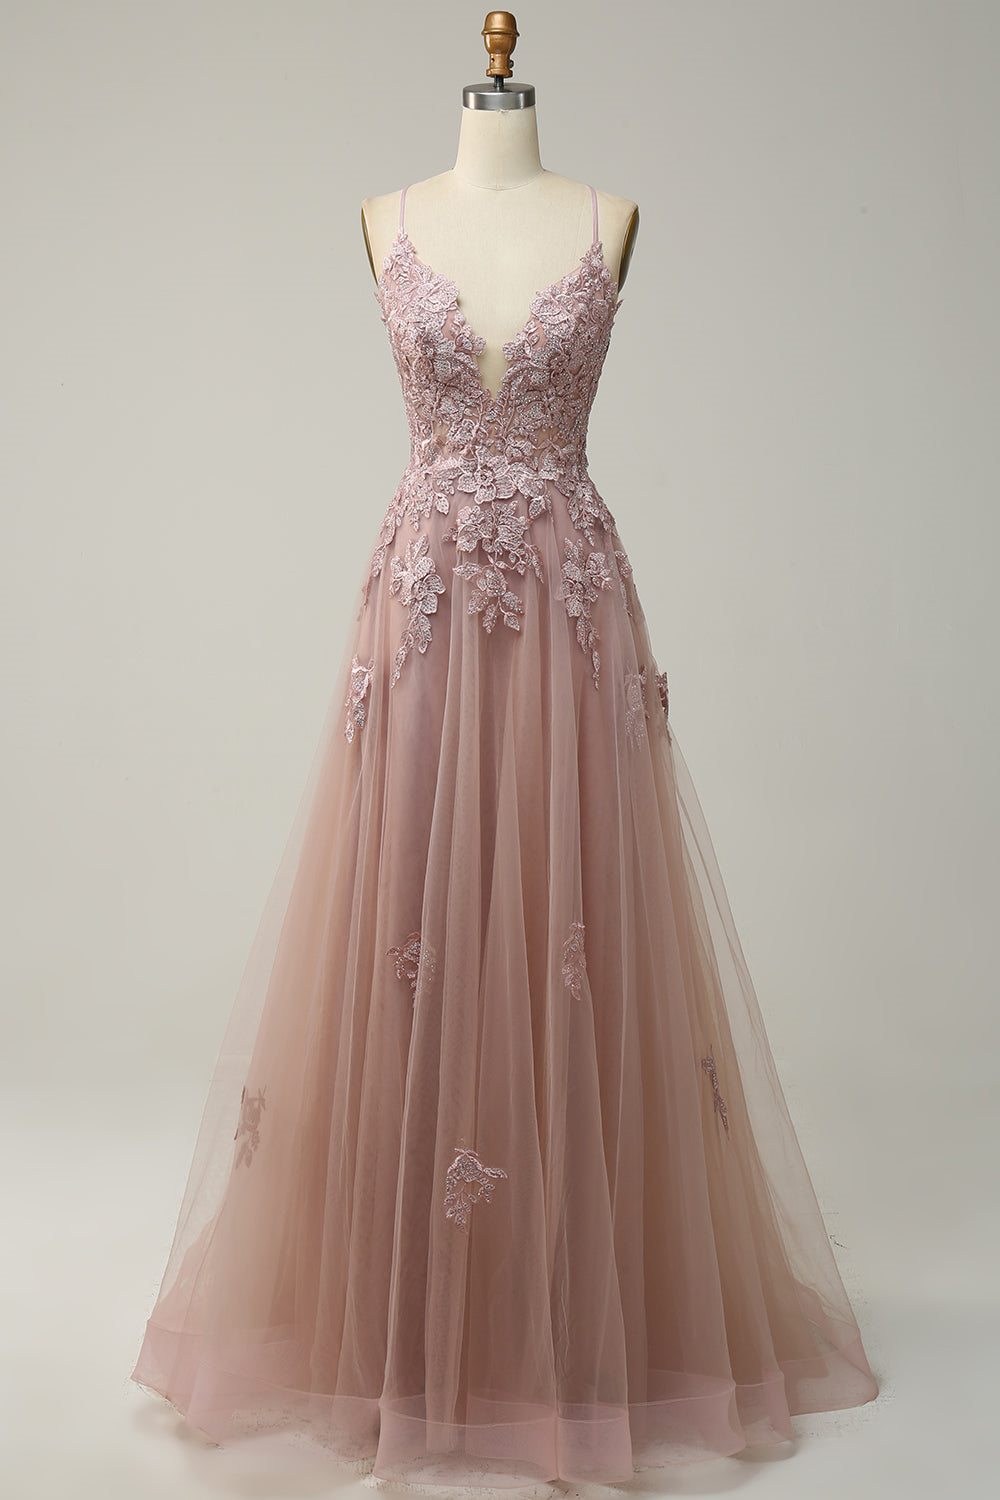 Blush Pink Plunging V Neck Appliques Lace-Up A-line Long Prom Dress